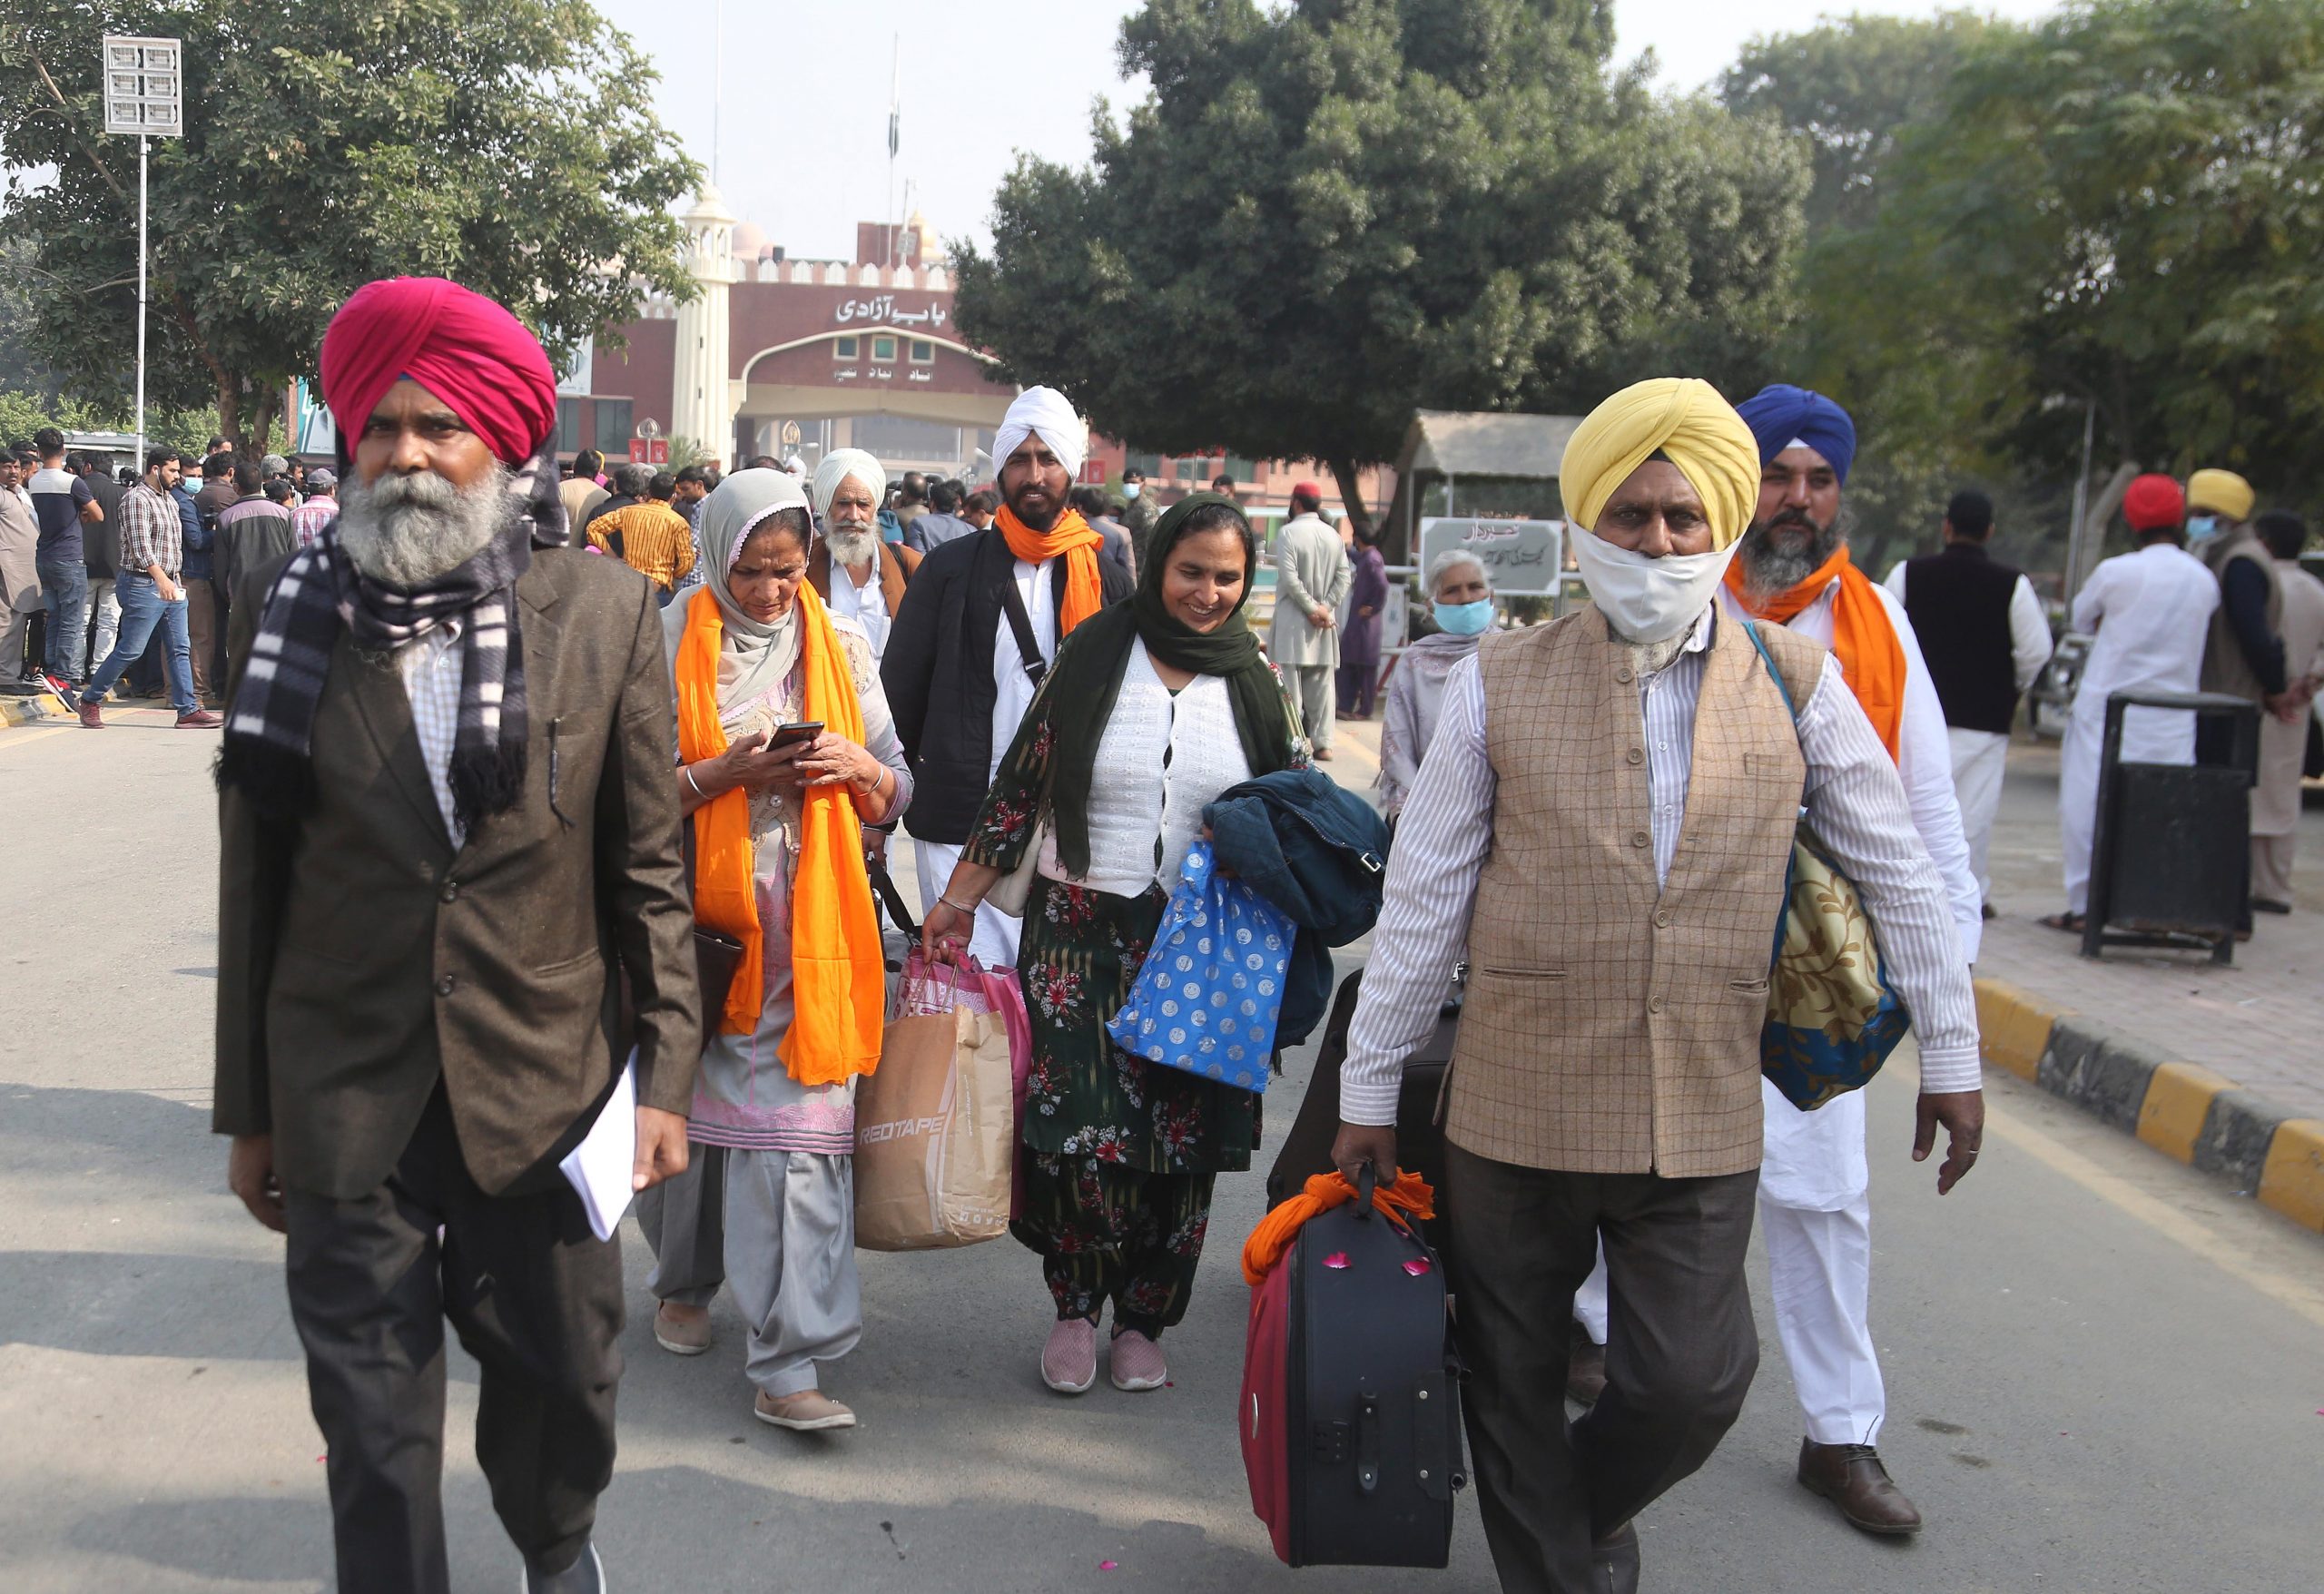 Turbans of Sikh asylum seekers detained by US authorities